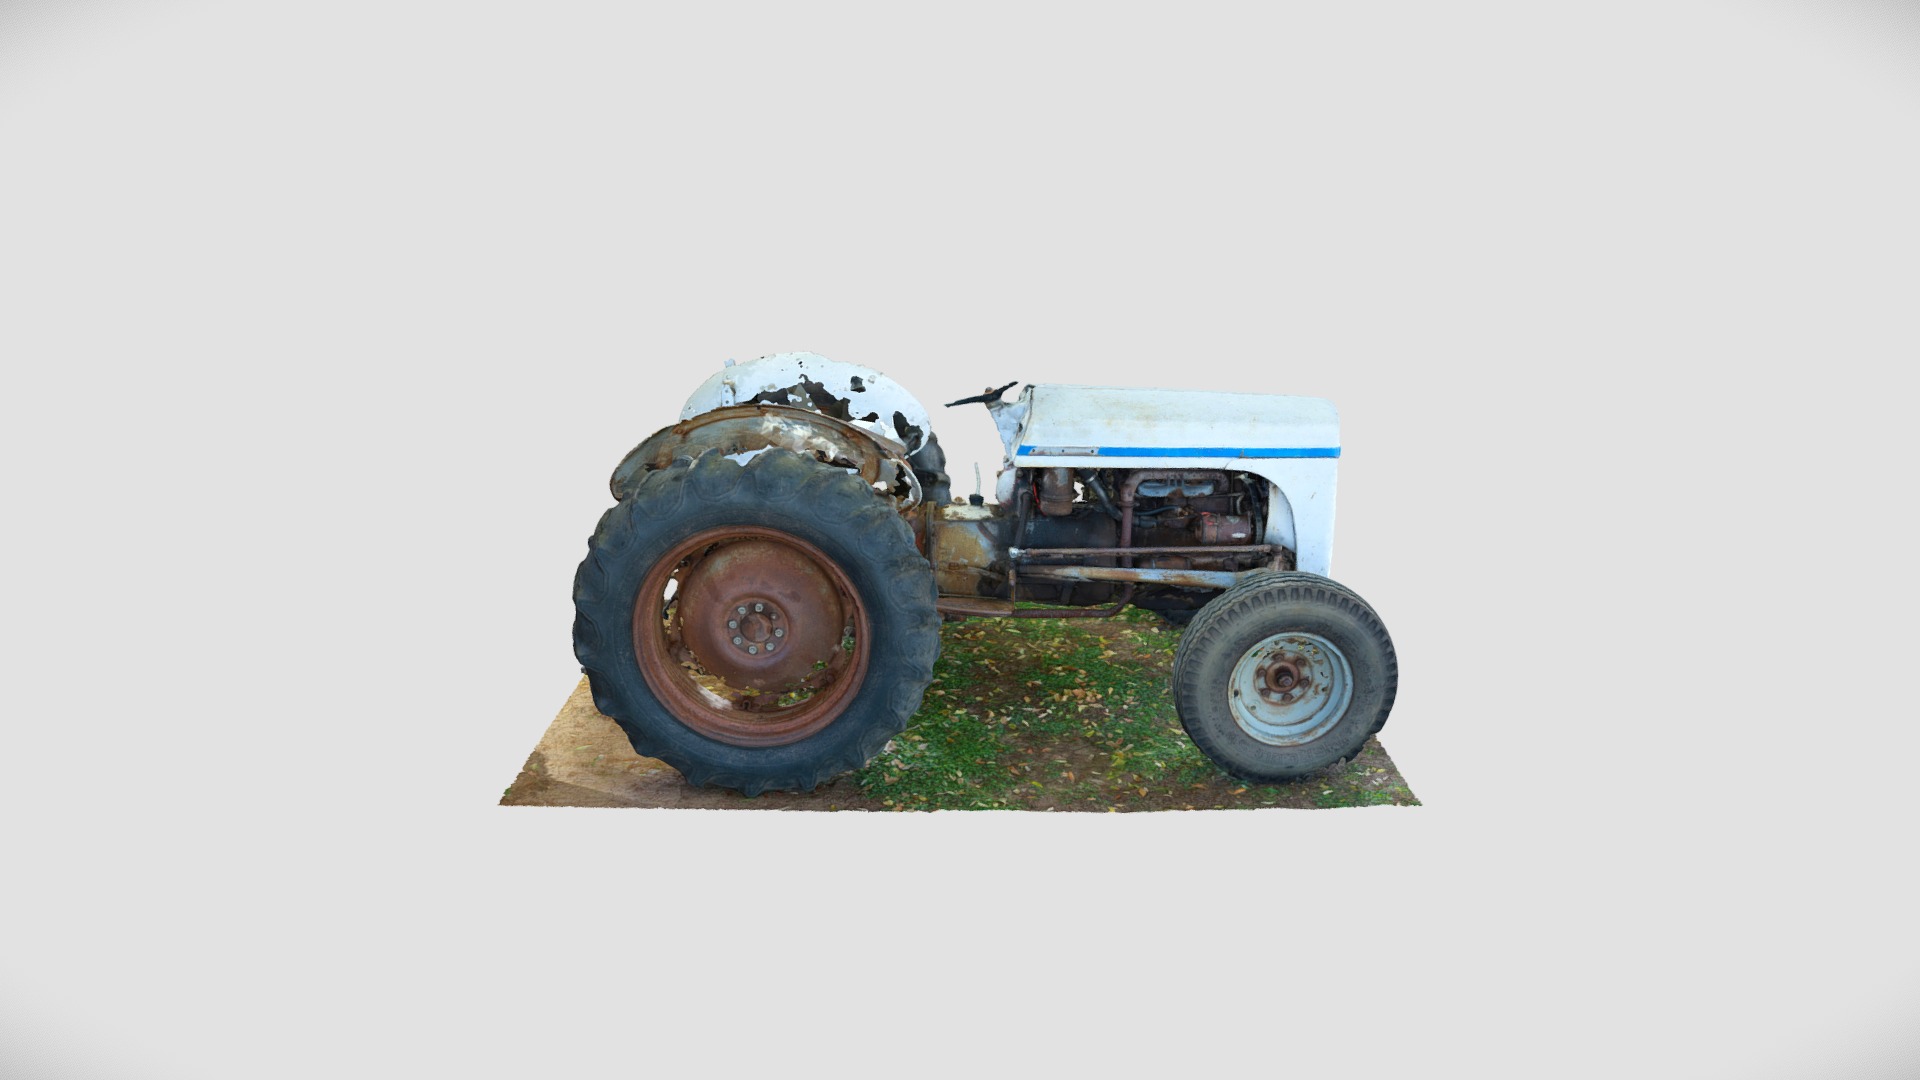 3D model 1951 Ferguson Tractor - This is a 3D model of the 1951 Ferguson Tractor. The 3D model is about a tractor on a grass field.